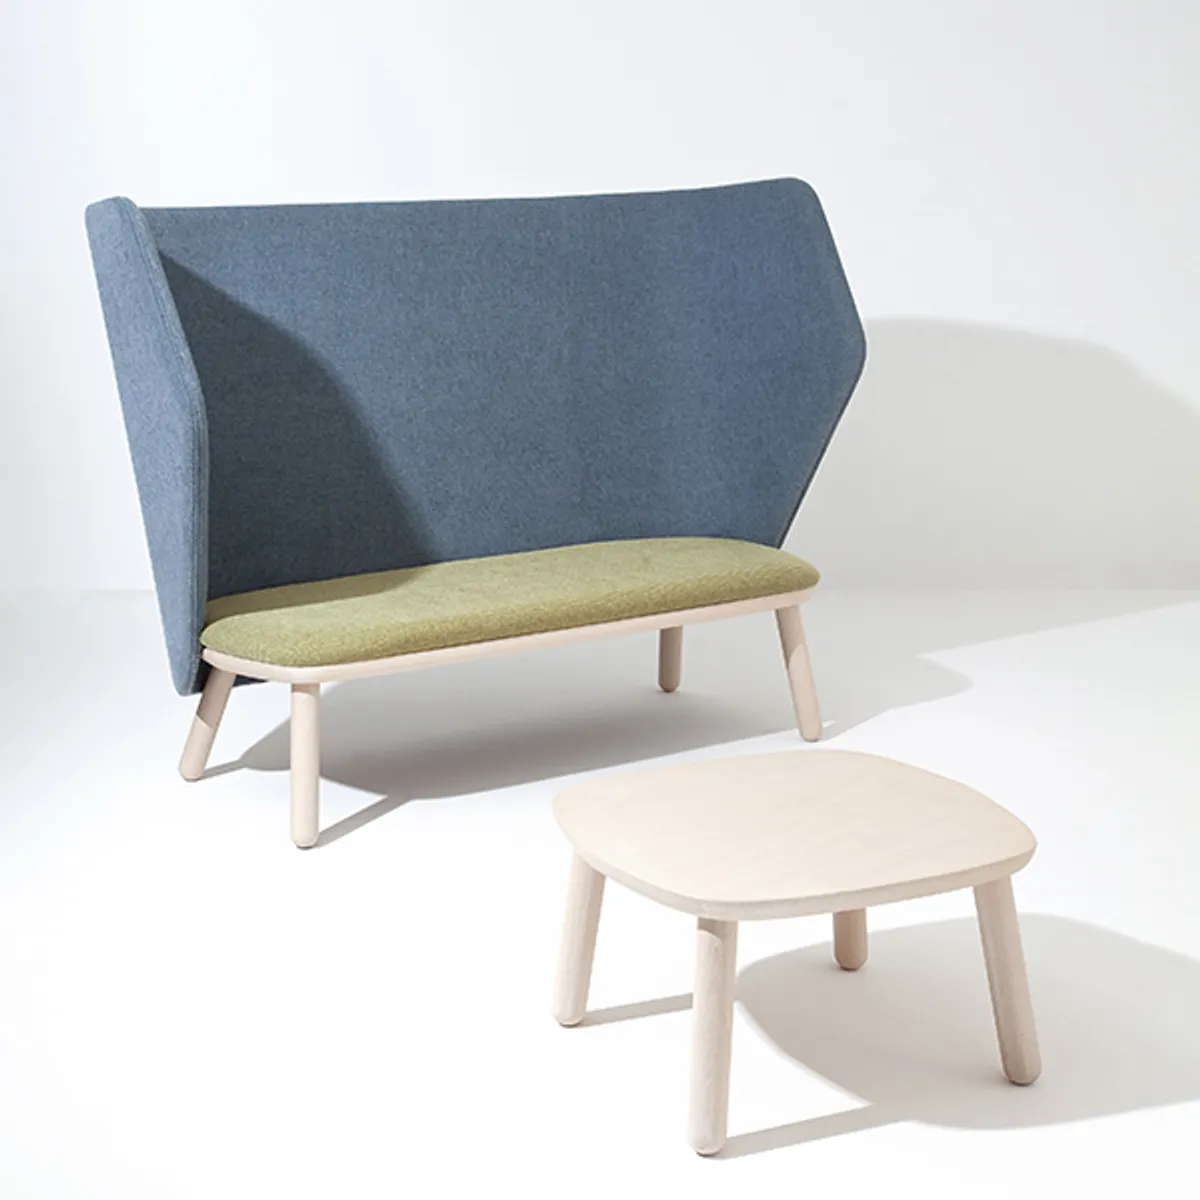 Ikkoku Lounge Chair Private Pod Chair Inside Out Contracts